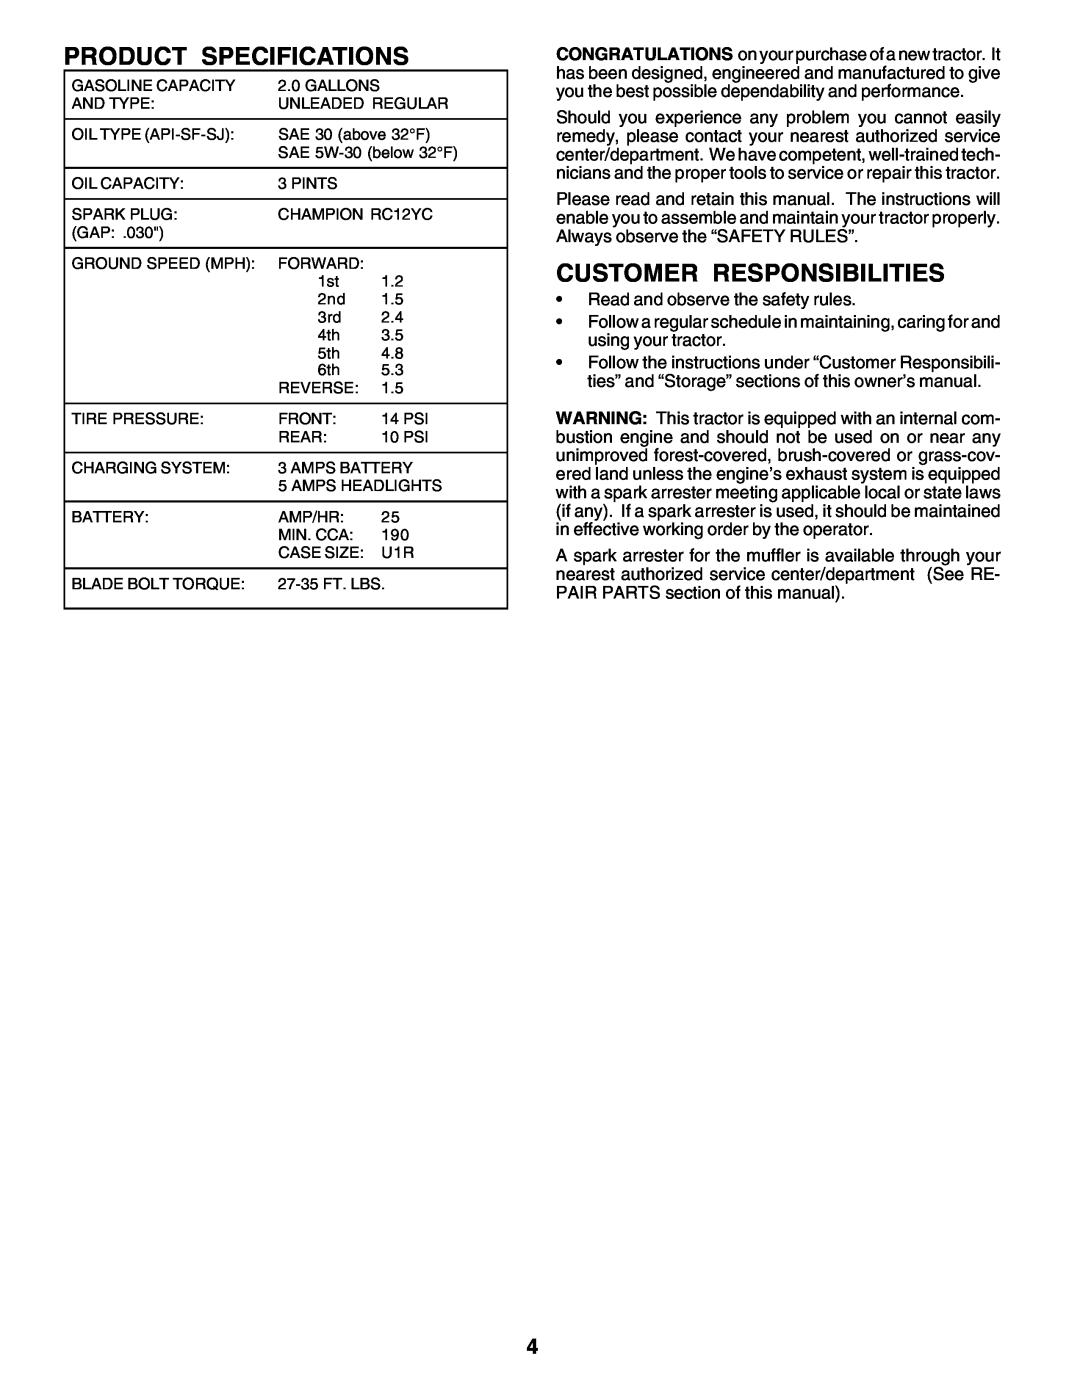 Weed Eater 180530 manual Product Specifications, Customer Responsibilities 